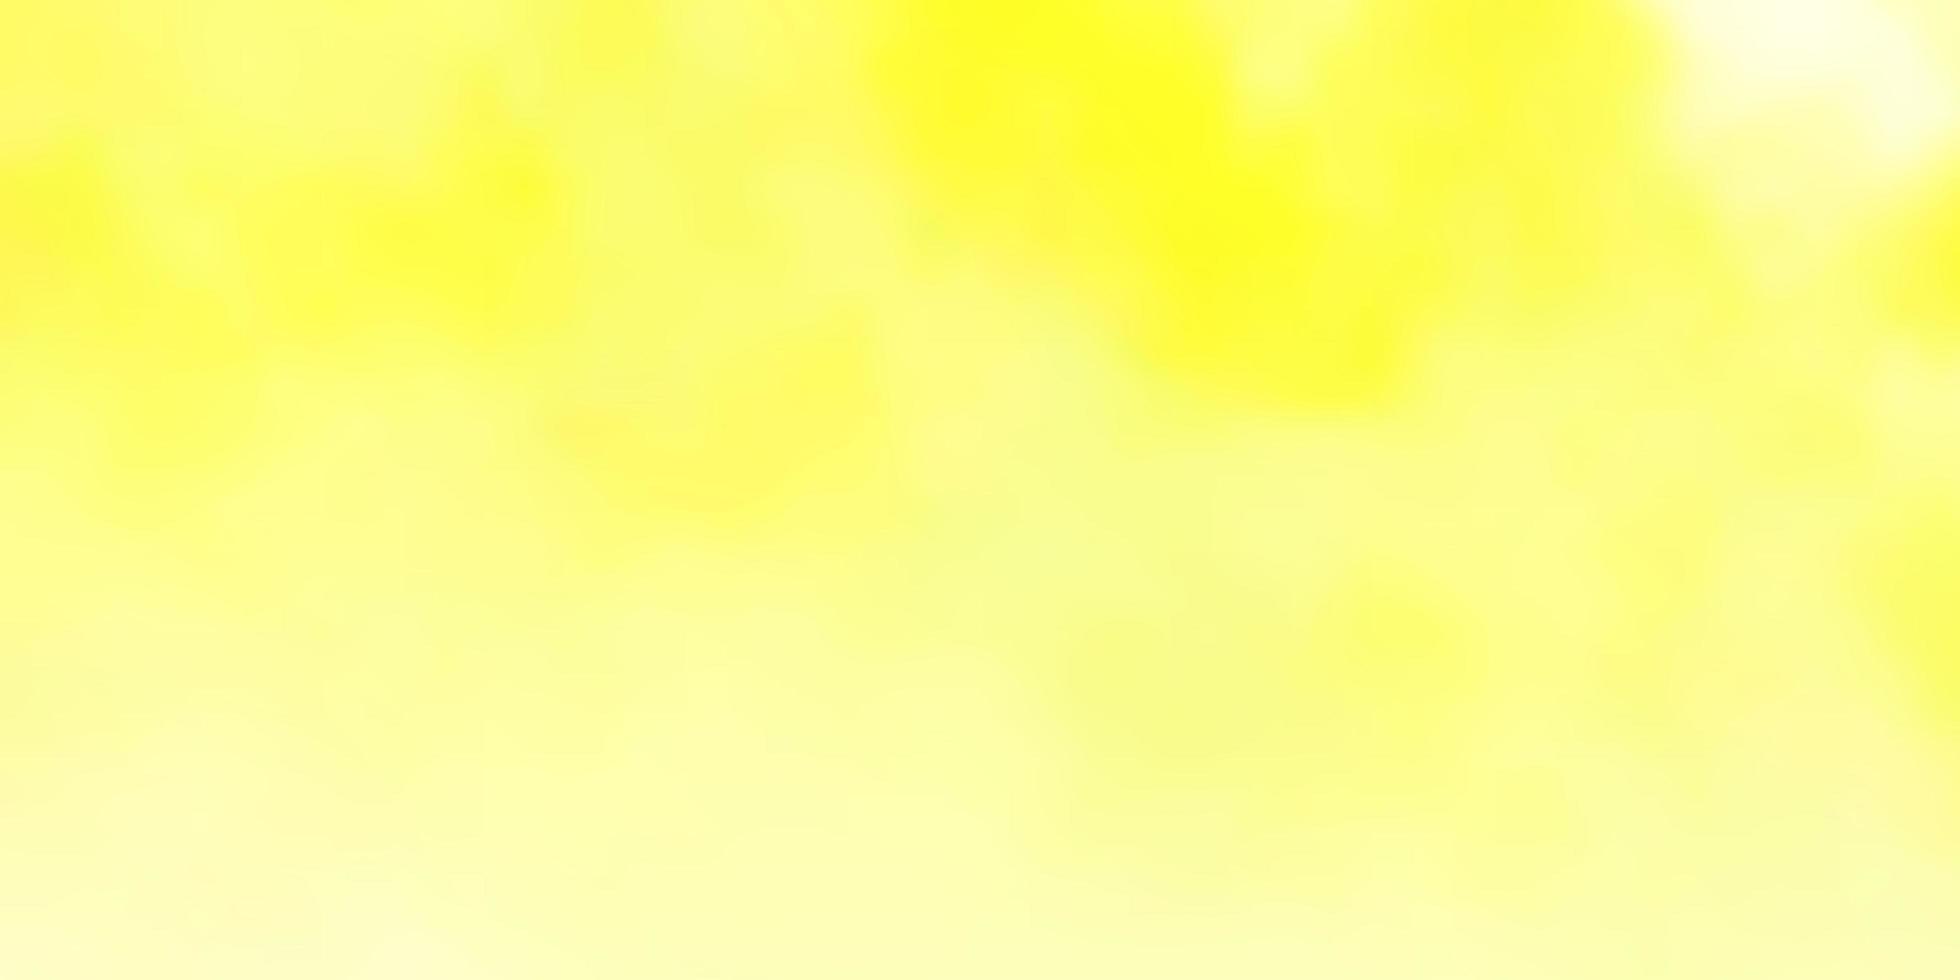 Light Yellow vector background with clouds.